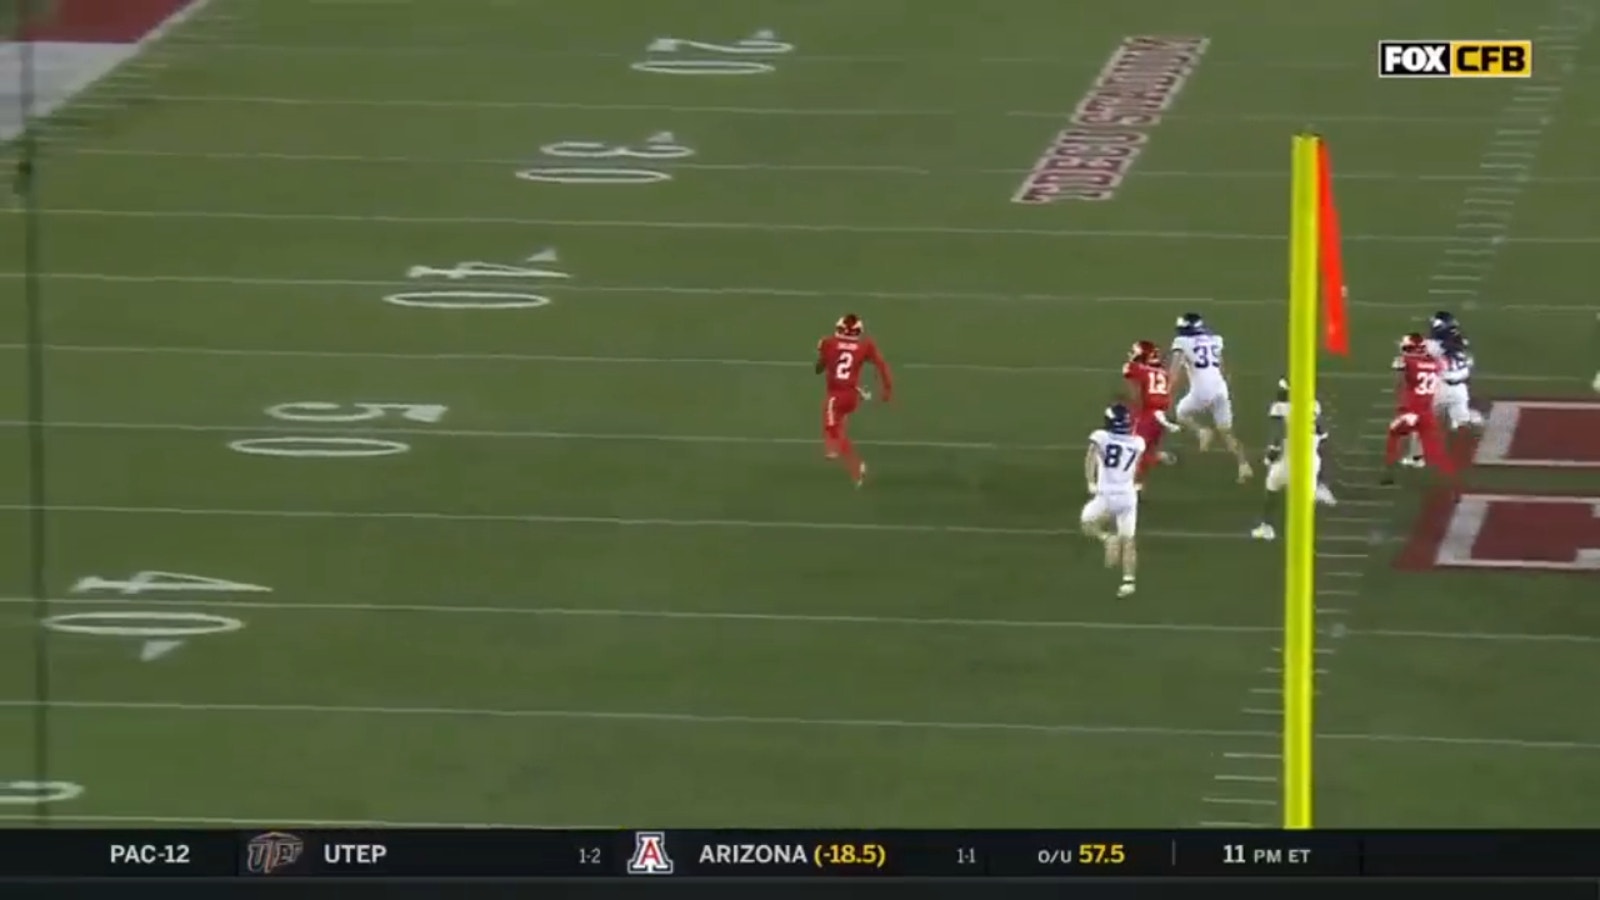 Matthew Golden takes a kickoff 98 yards to the HOUSE.